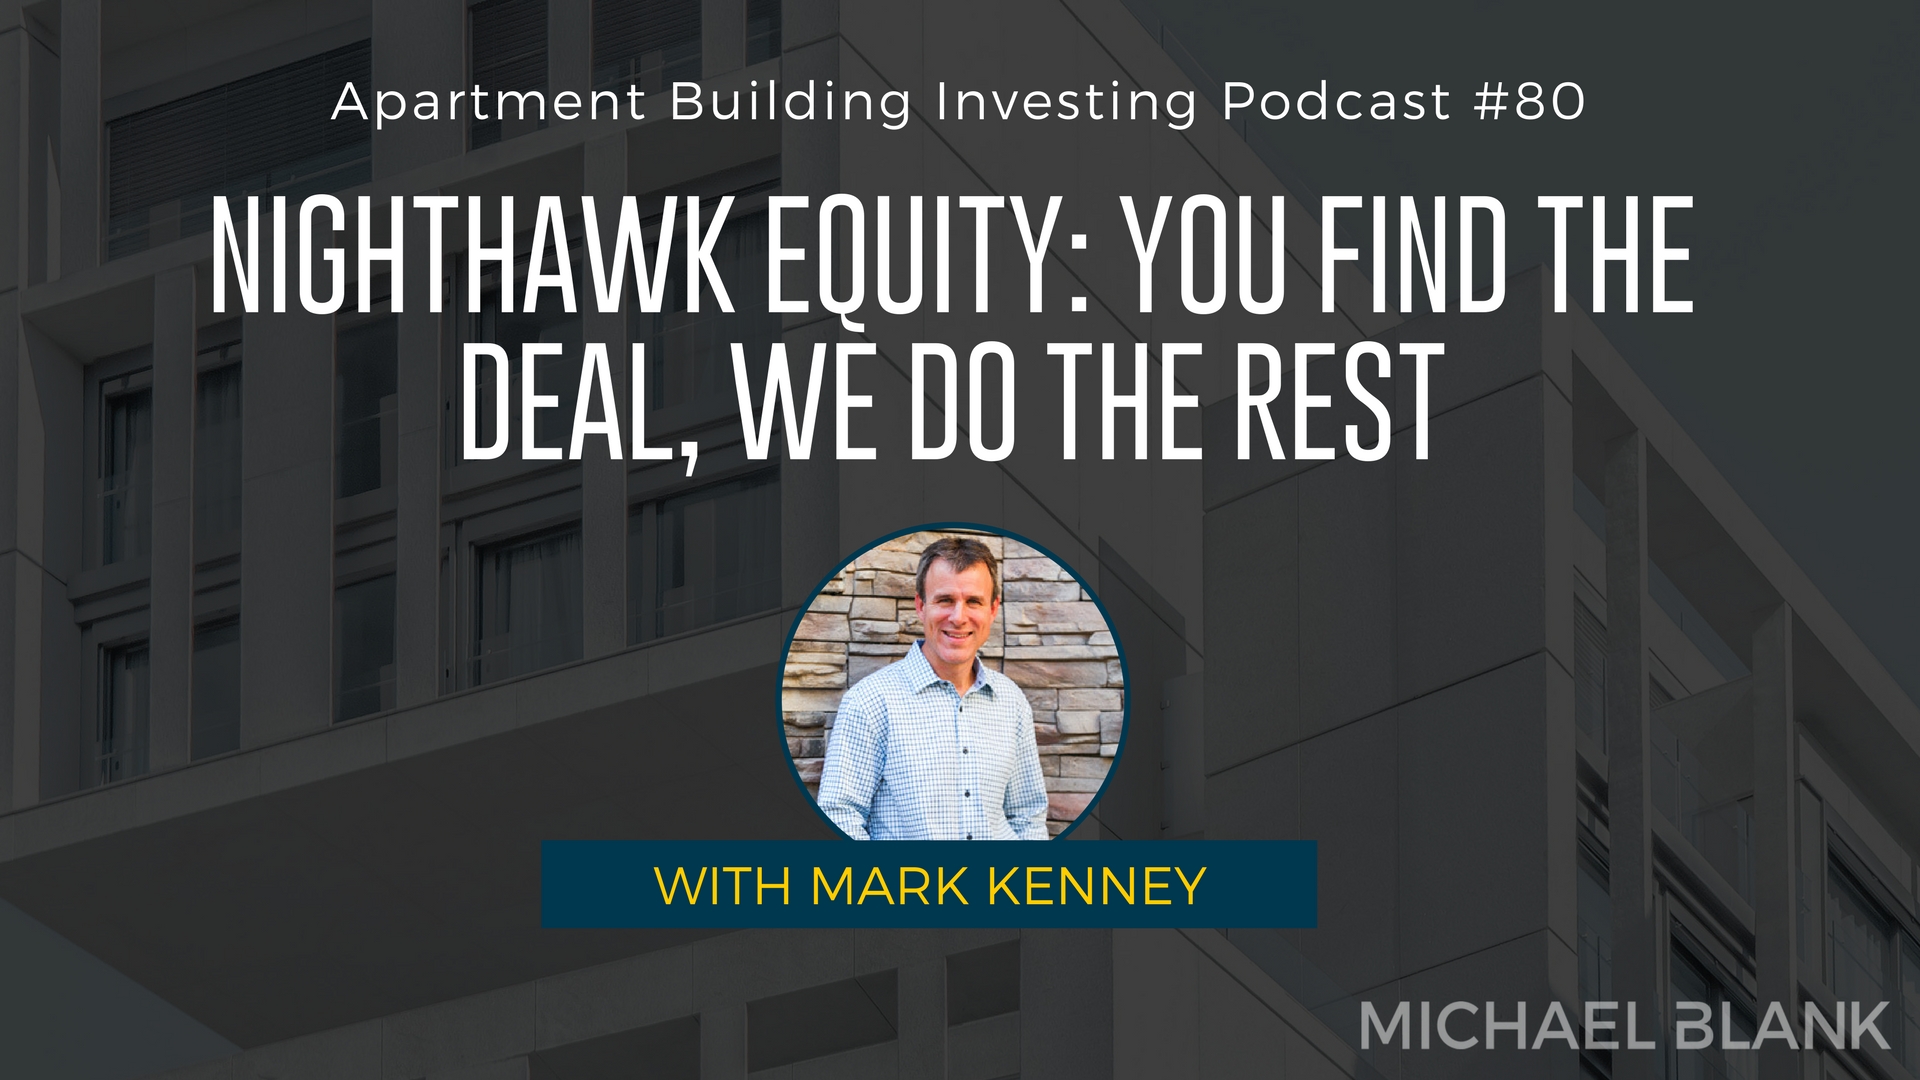 Nighthawk Equity: You find the Deal, We do the Rest